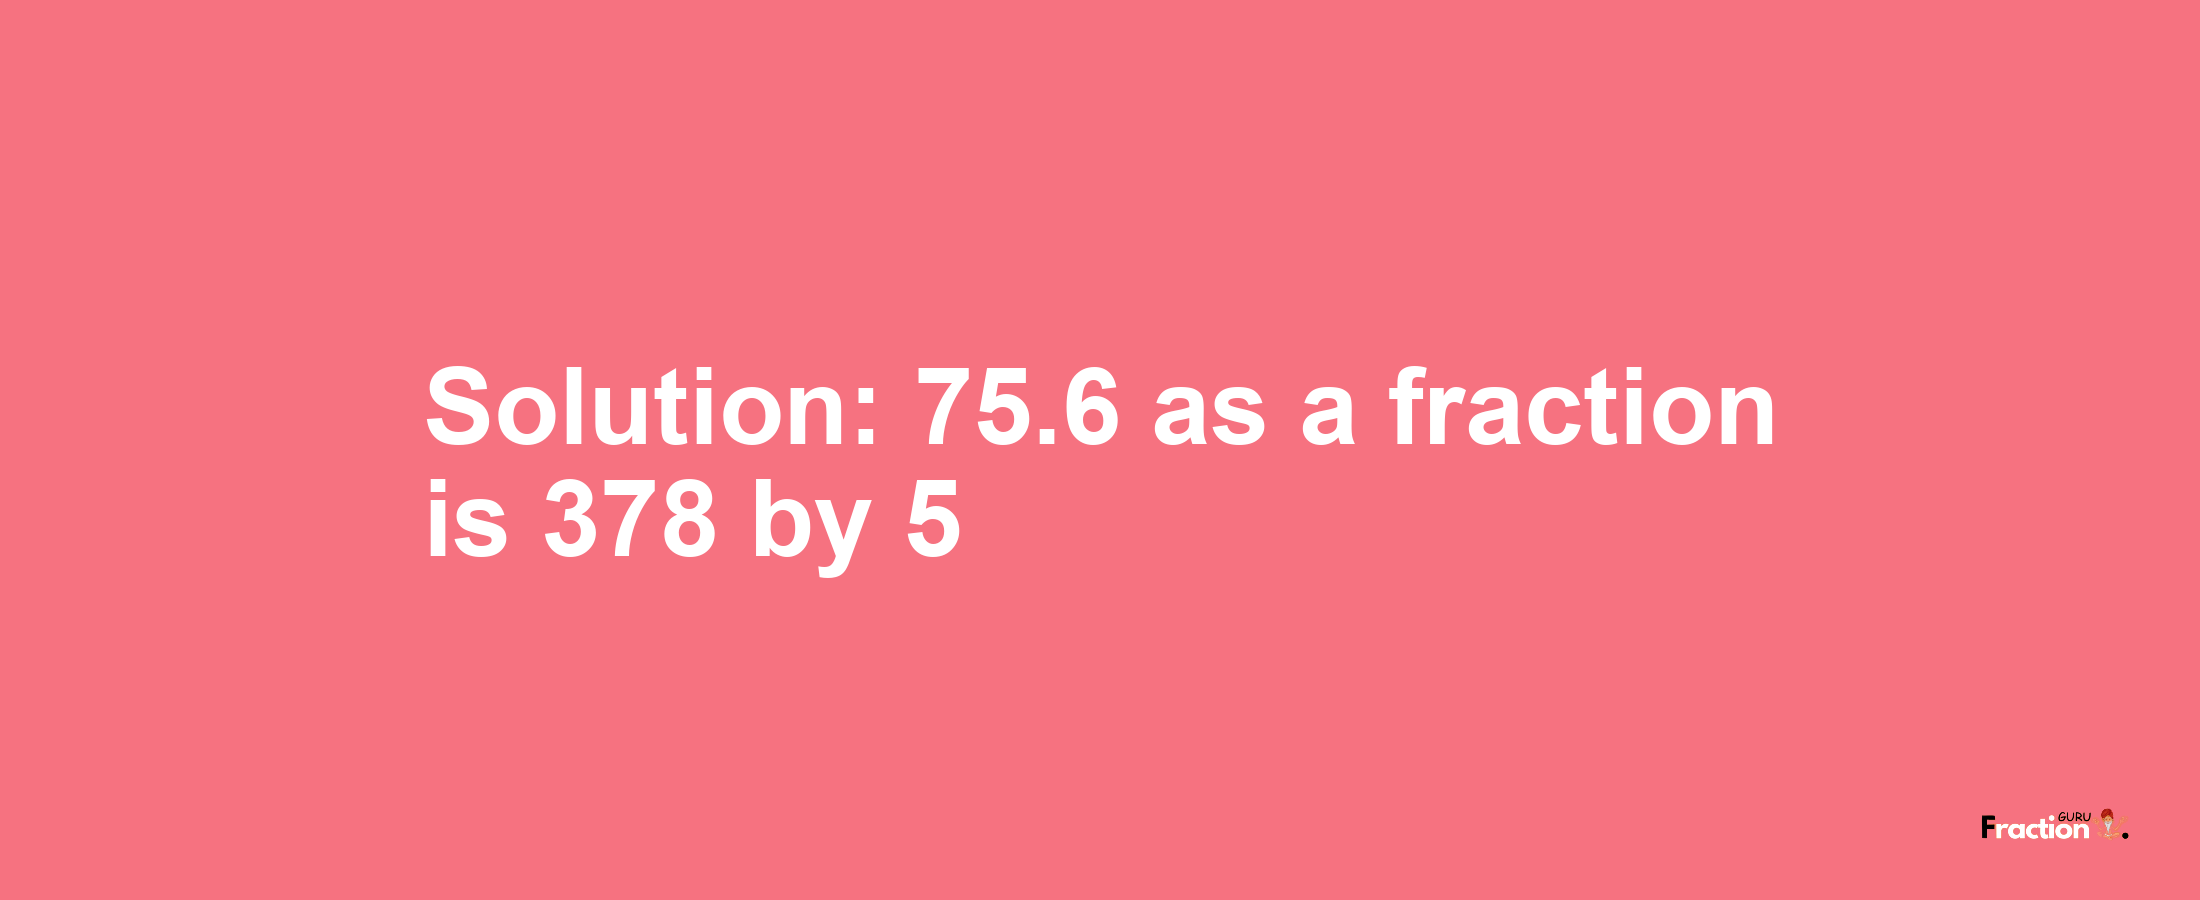 Solution:75.6 as a fraction is 378/5